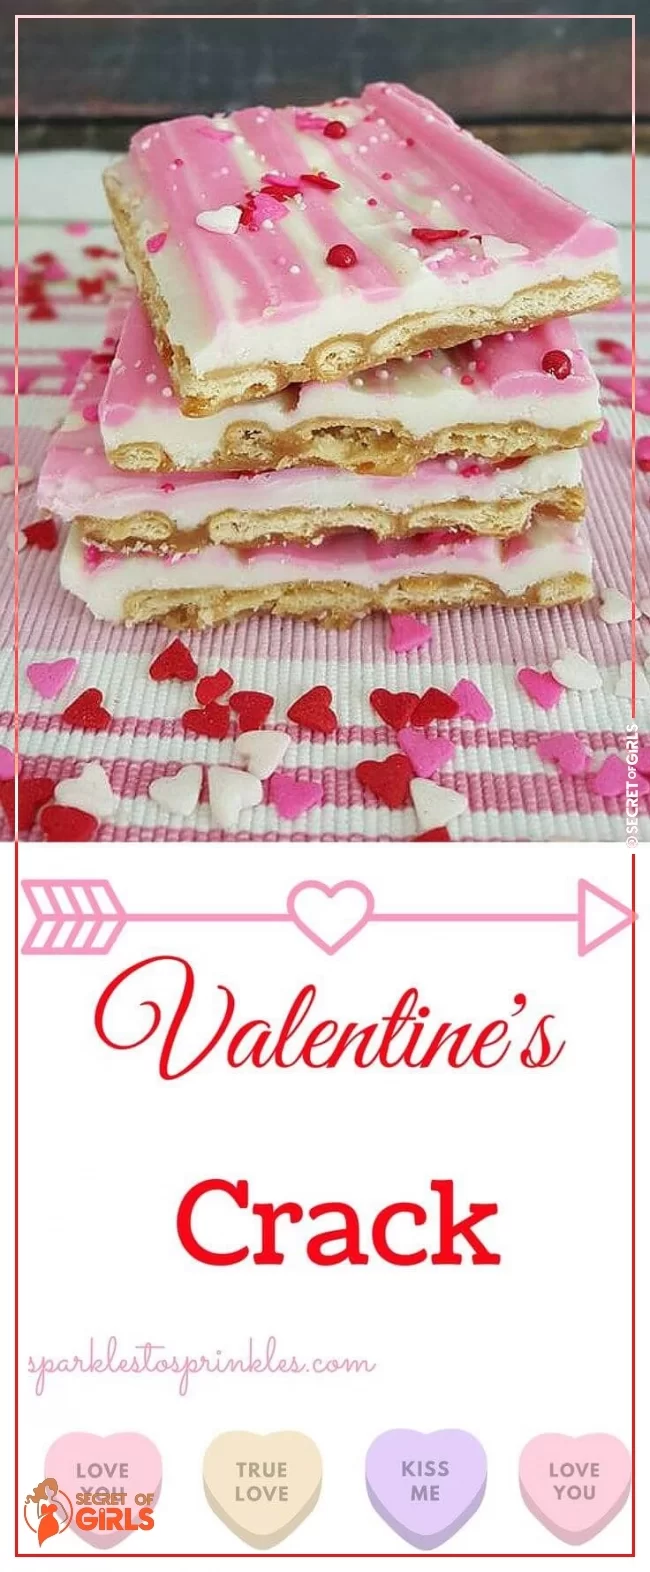 Pink and White Crack Candy | 29 Adorable Valentine’s Day Candy Ideas